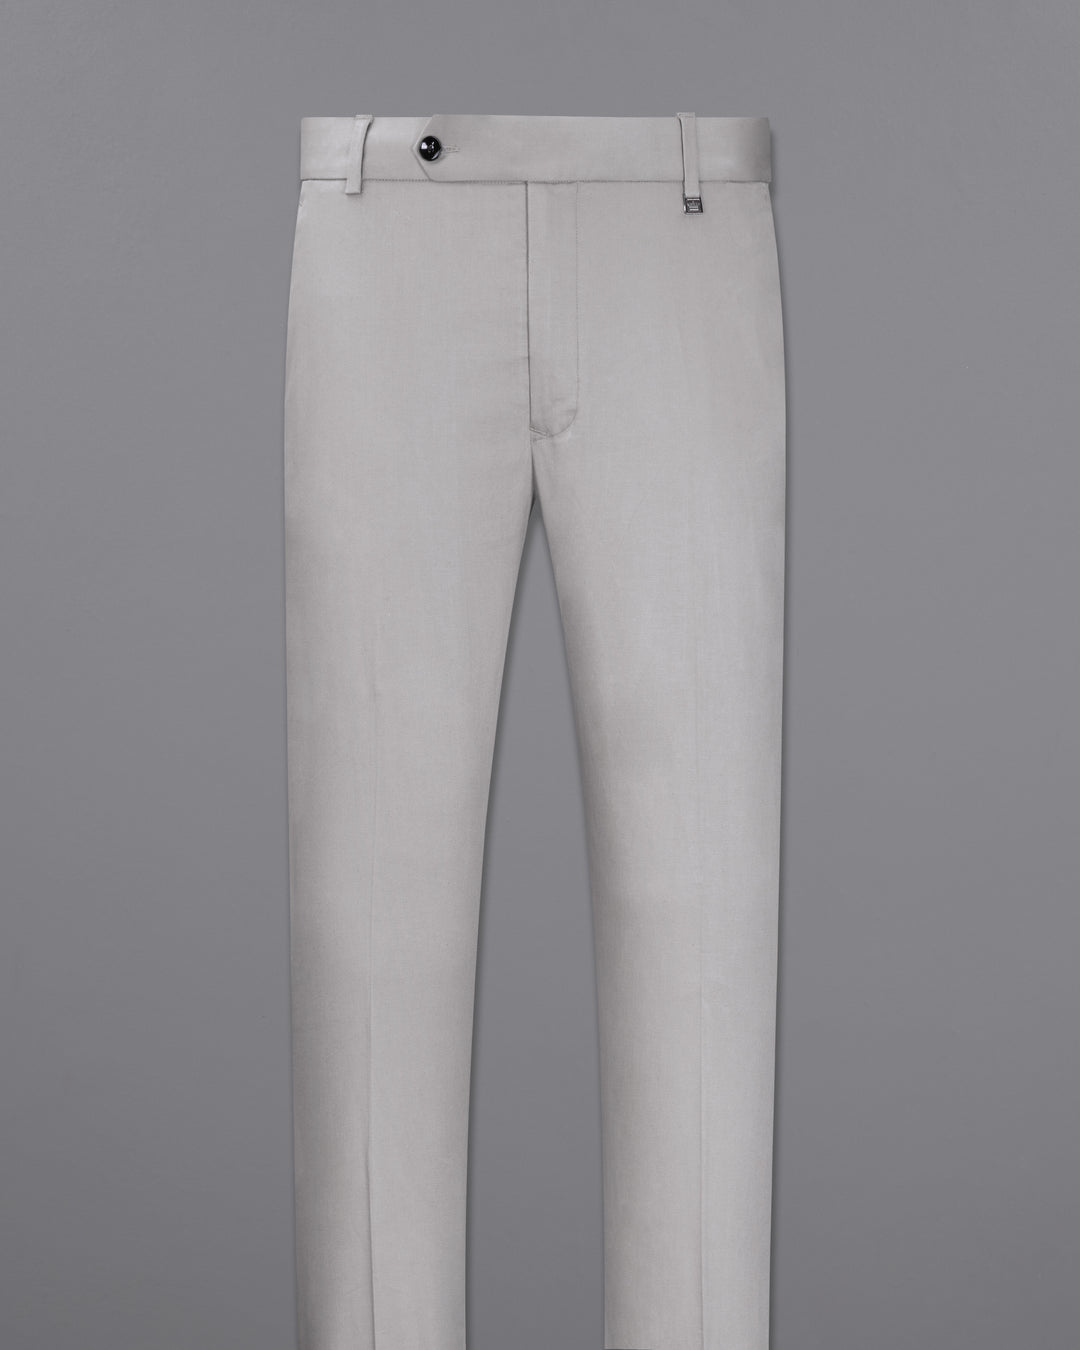 Timeless Classics: White Shirt Matching Pant Combination for a